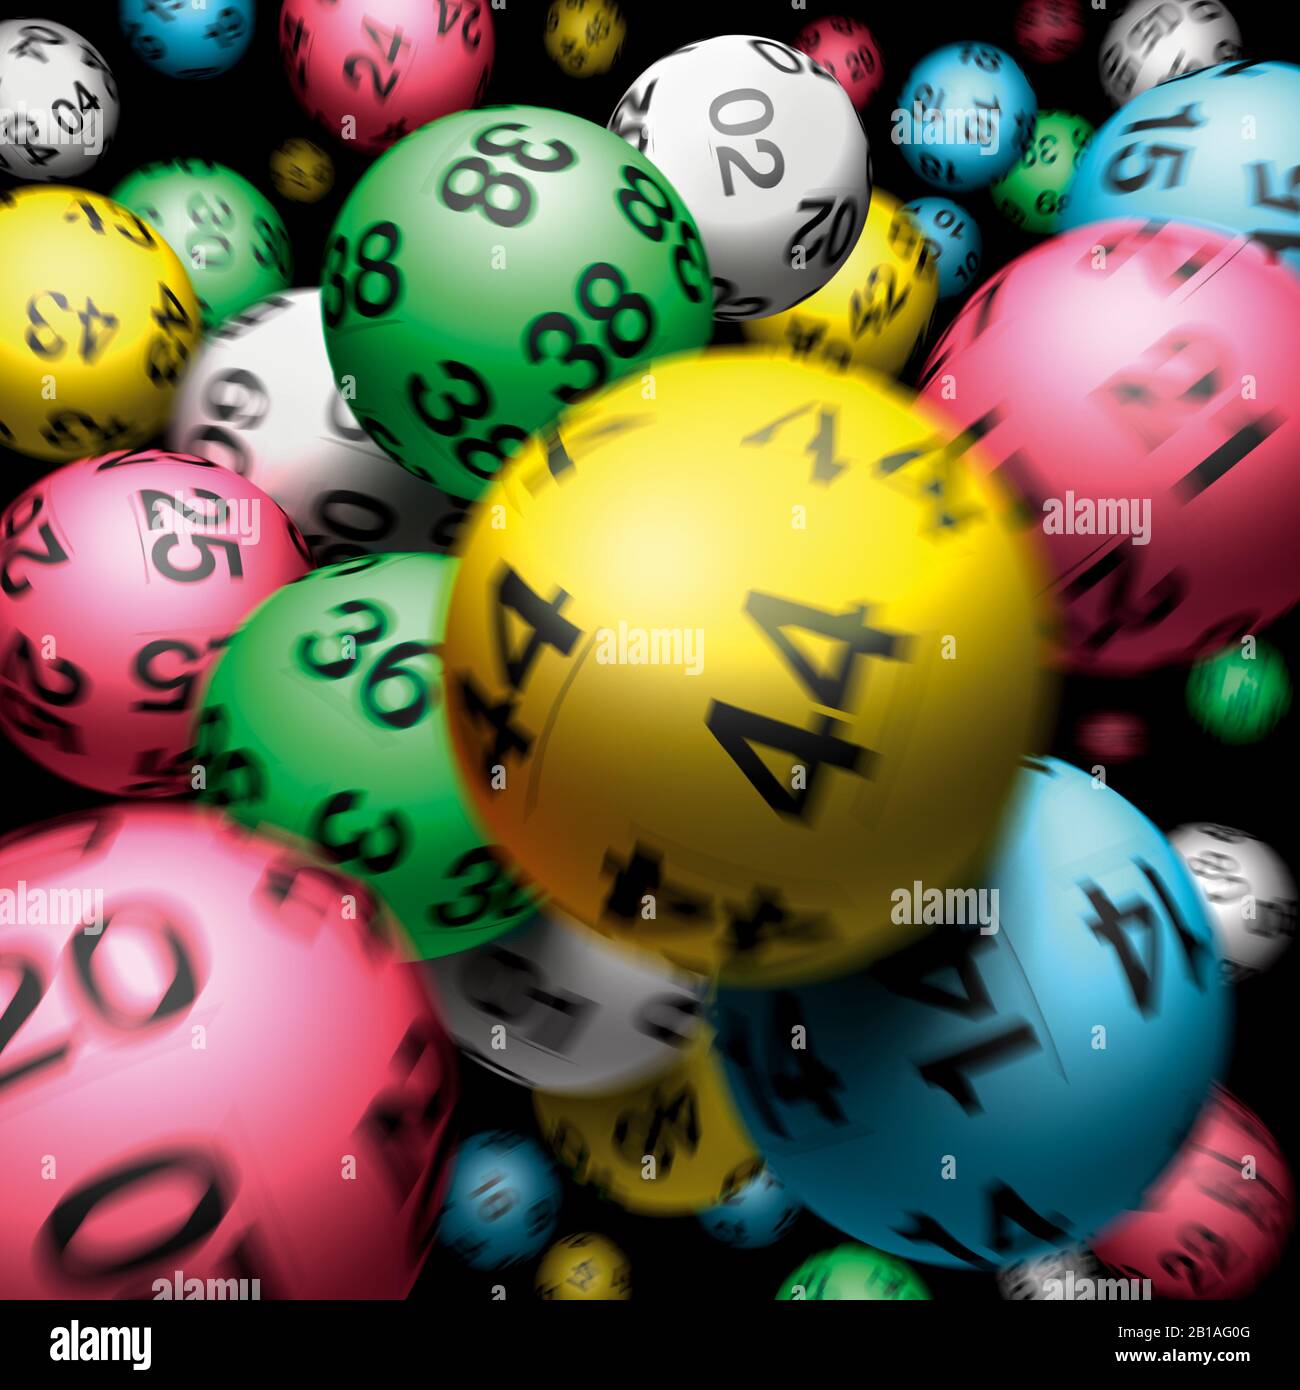 Lottery ball balls falling Chance, luck, gambling wealth money. Lotto, Motion Blur. Close up black background. bouncing 44 Stock Photo